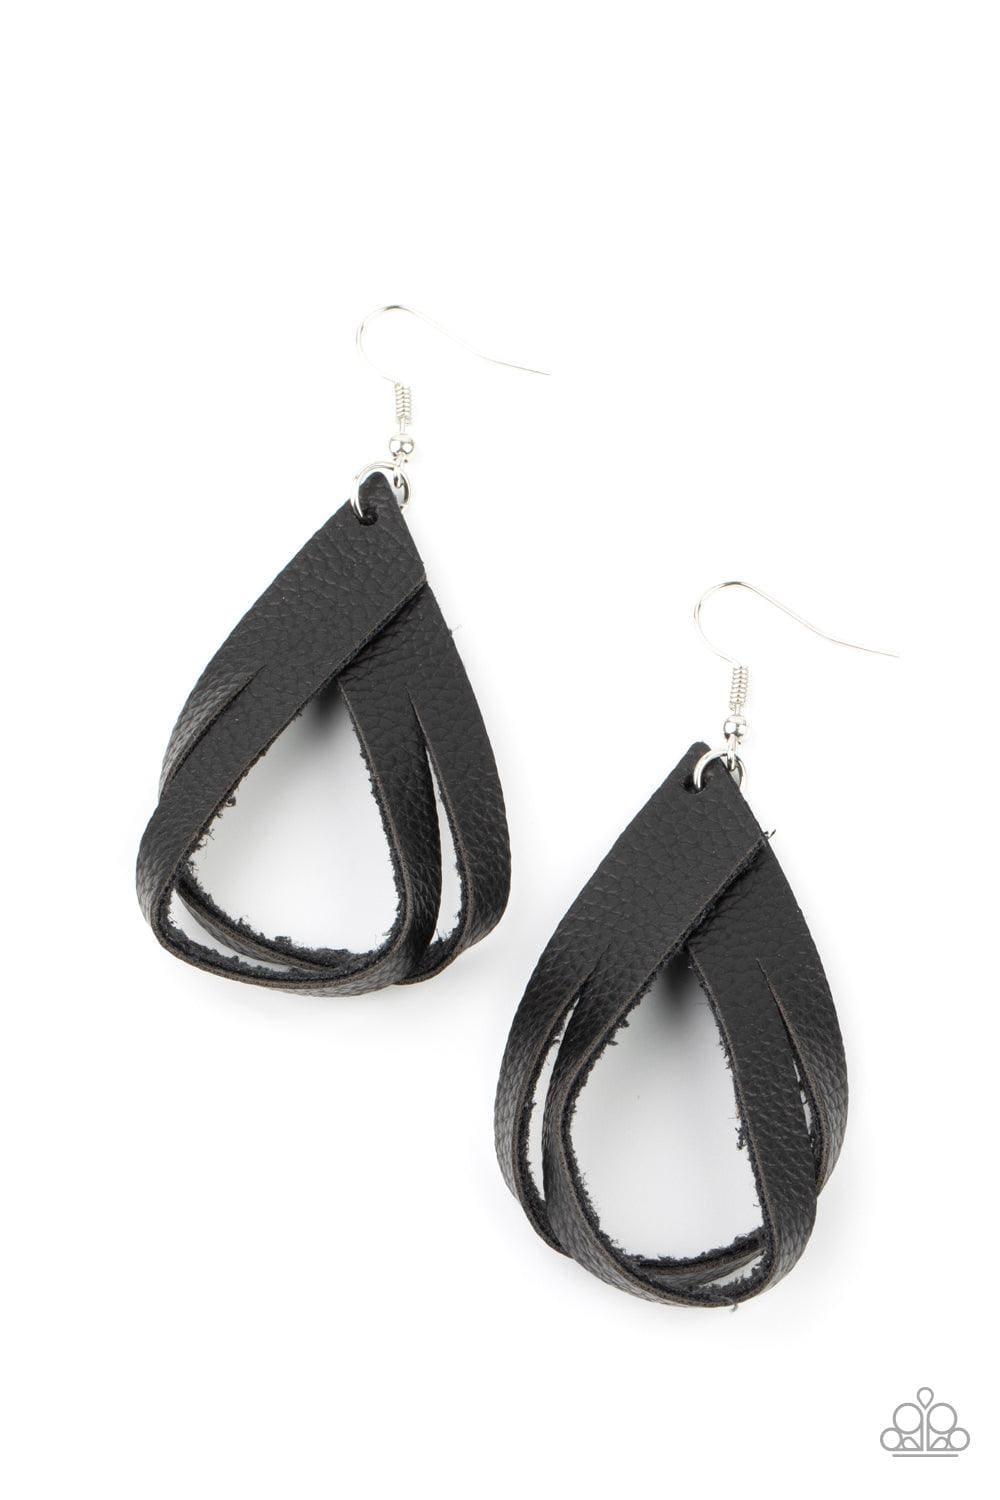 Paparazzi Accessories - Thats a Strap - Black Earrings - Bling by JessieK